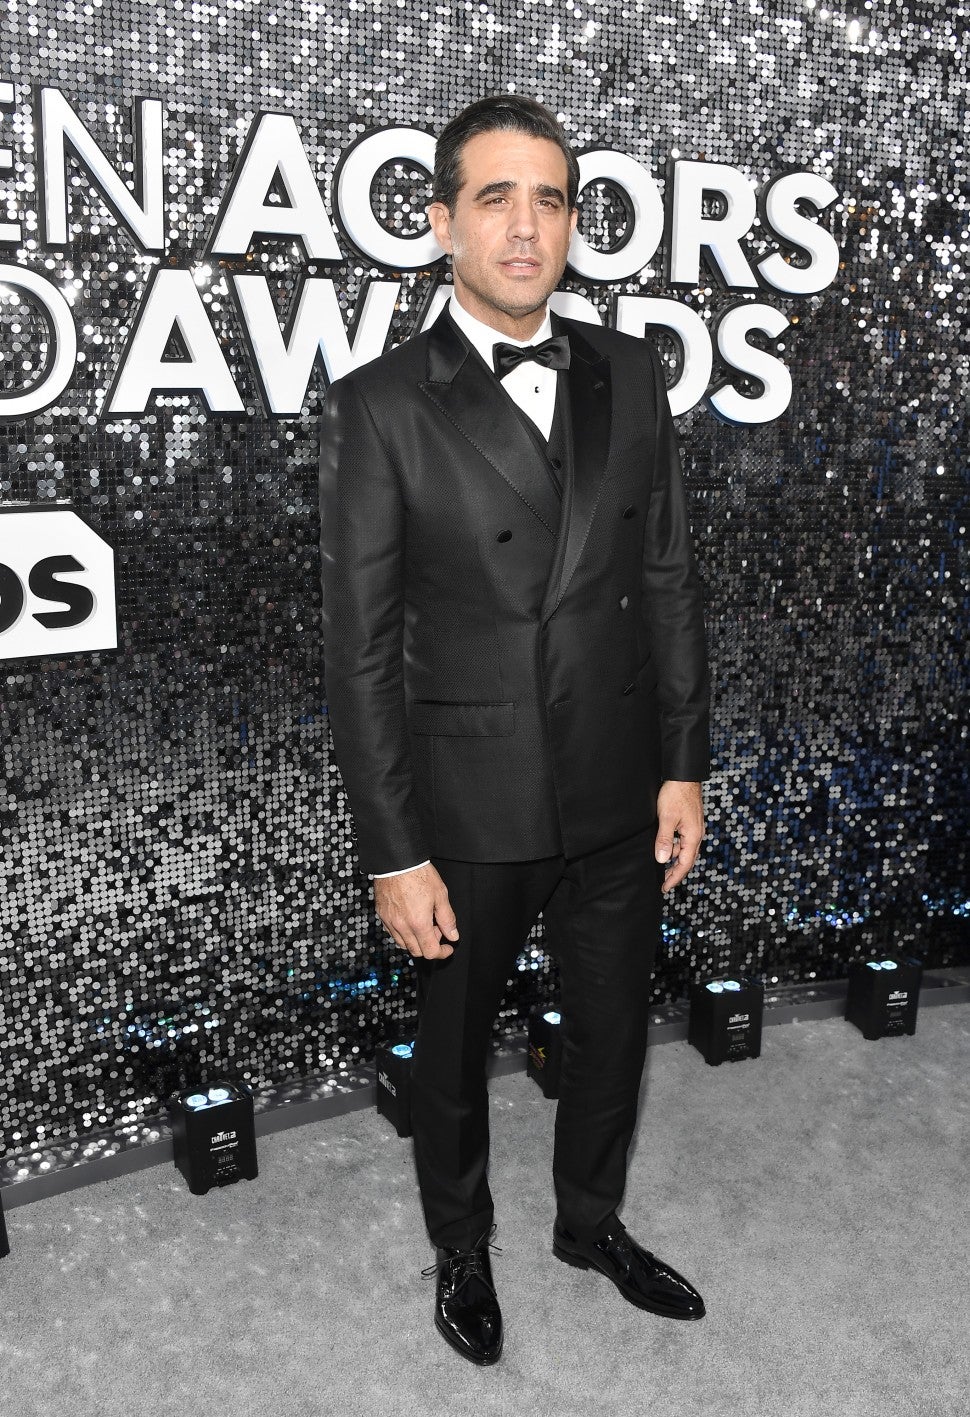 Bobby Cannavale at the 26th Annual Screen Actors Guild Awards